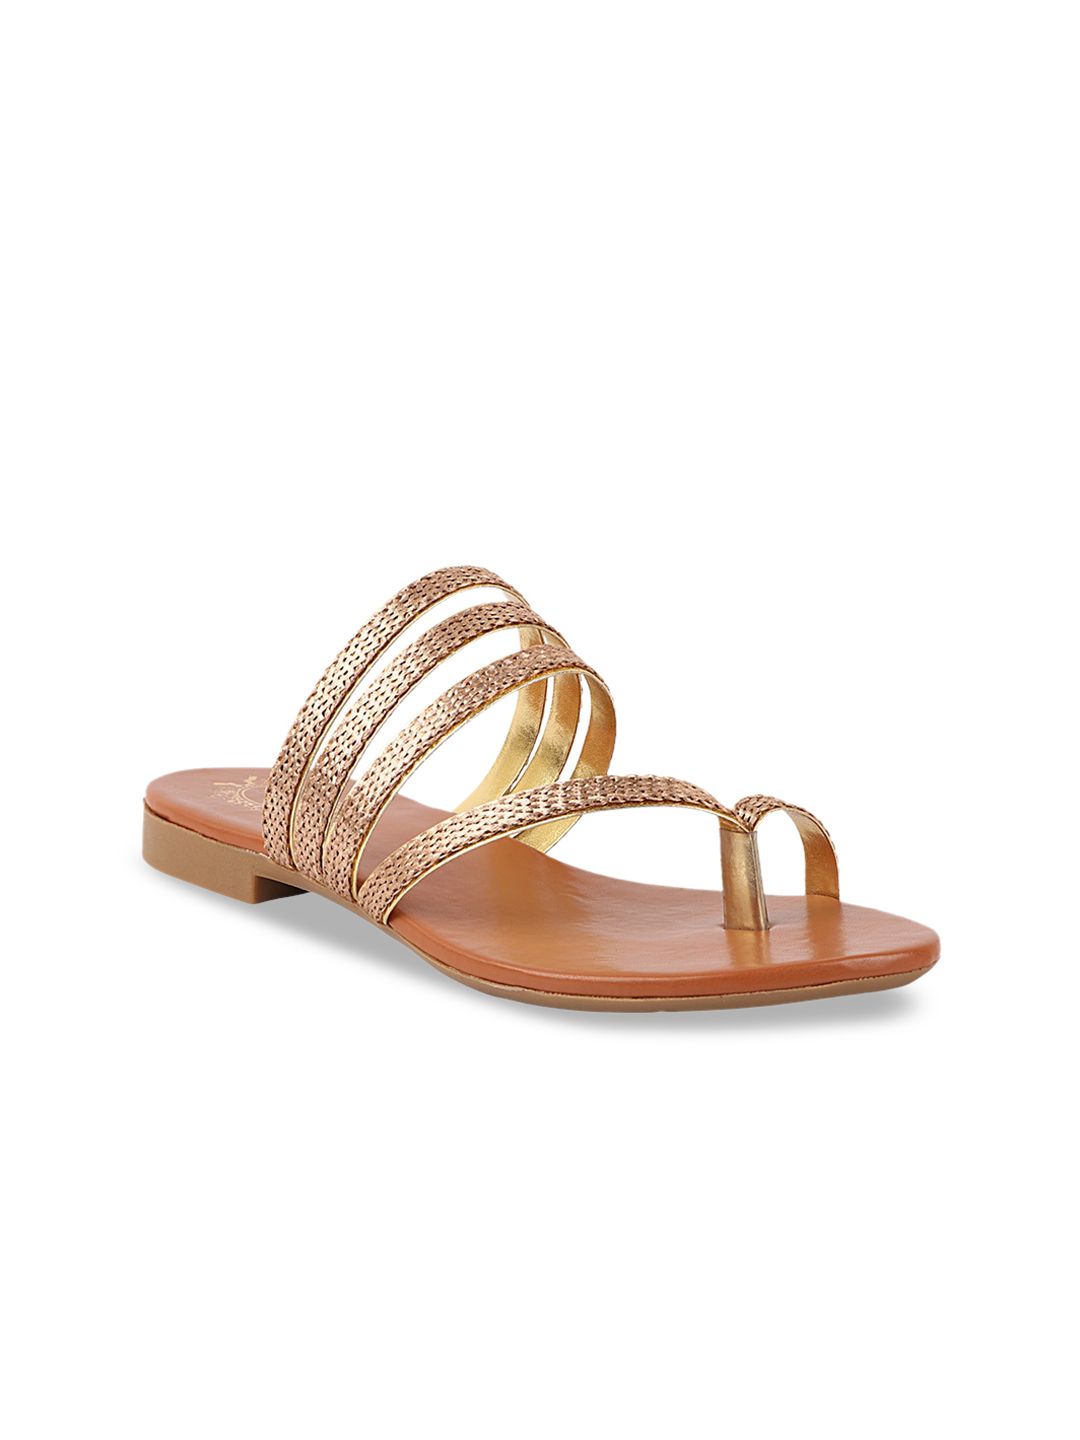 Shoetopia Women Gold-Toned One Toe Flats Price in India